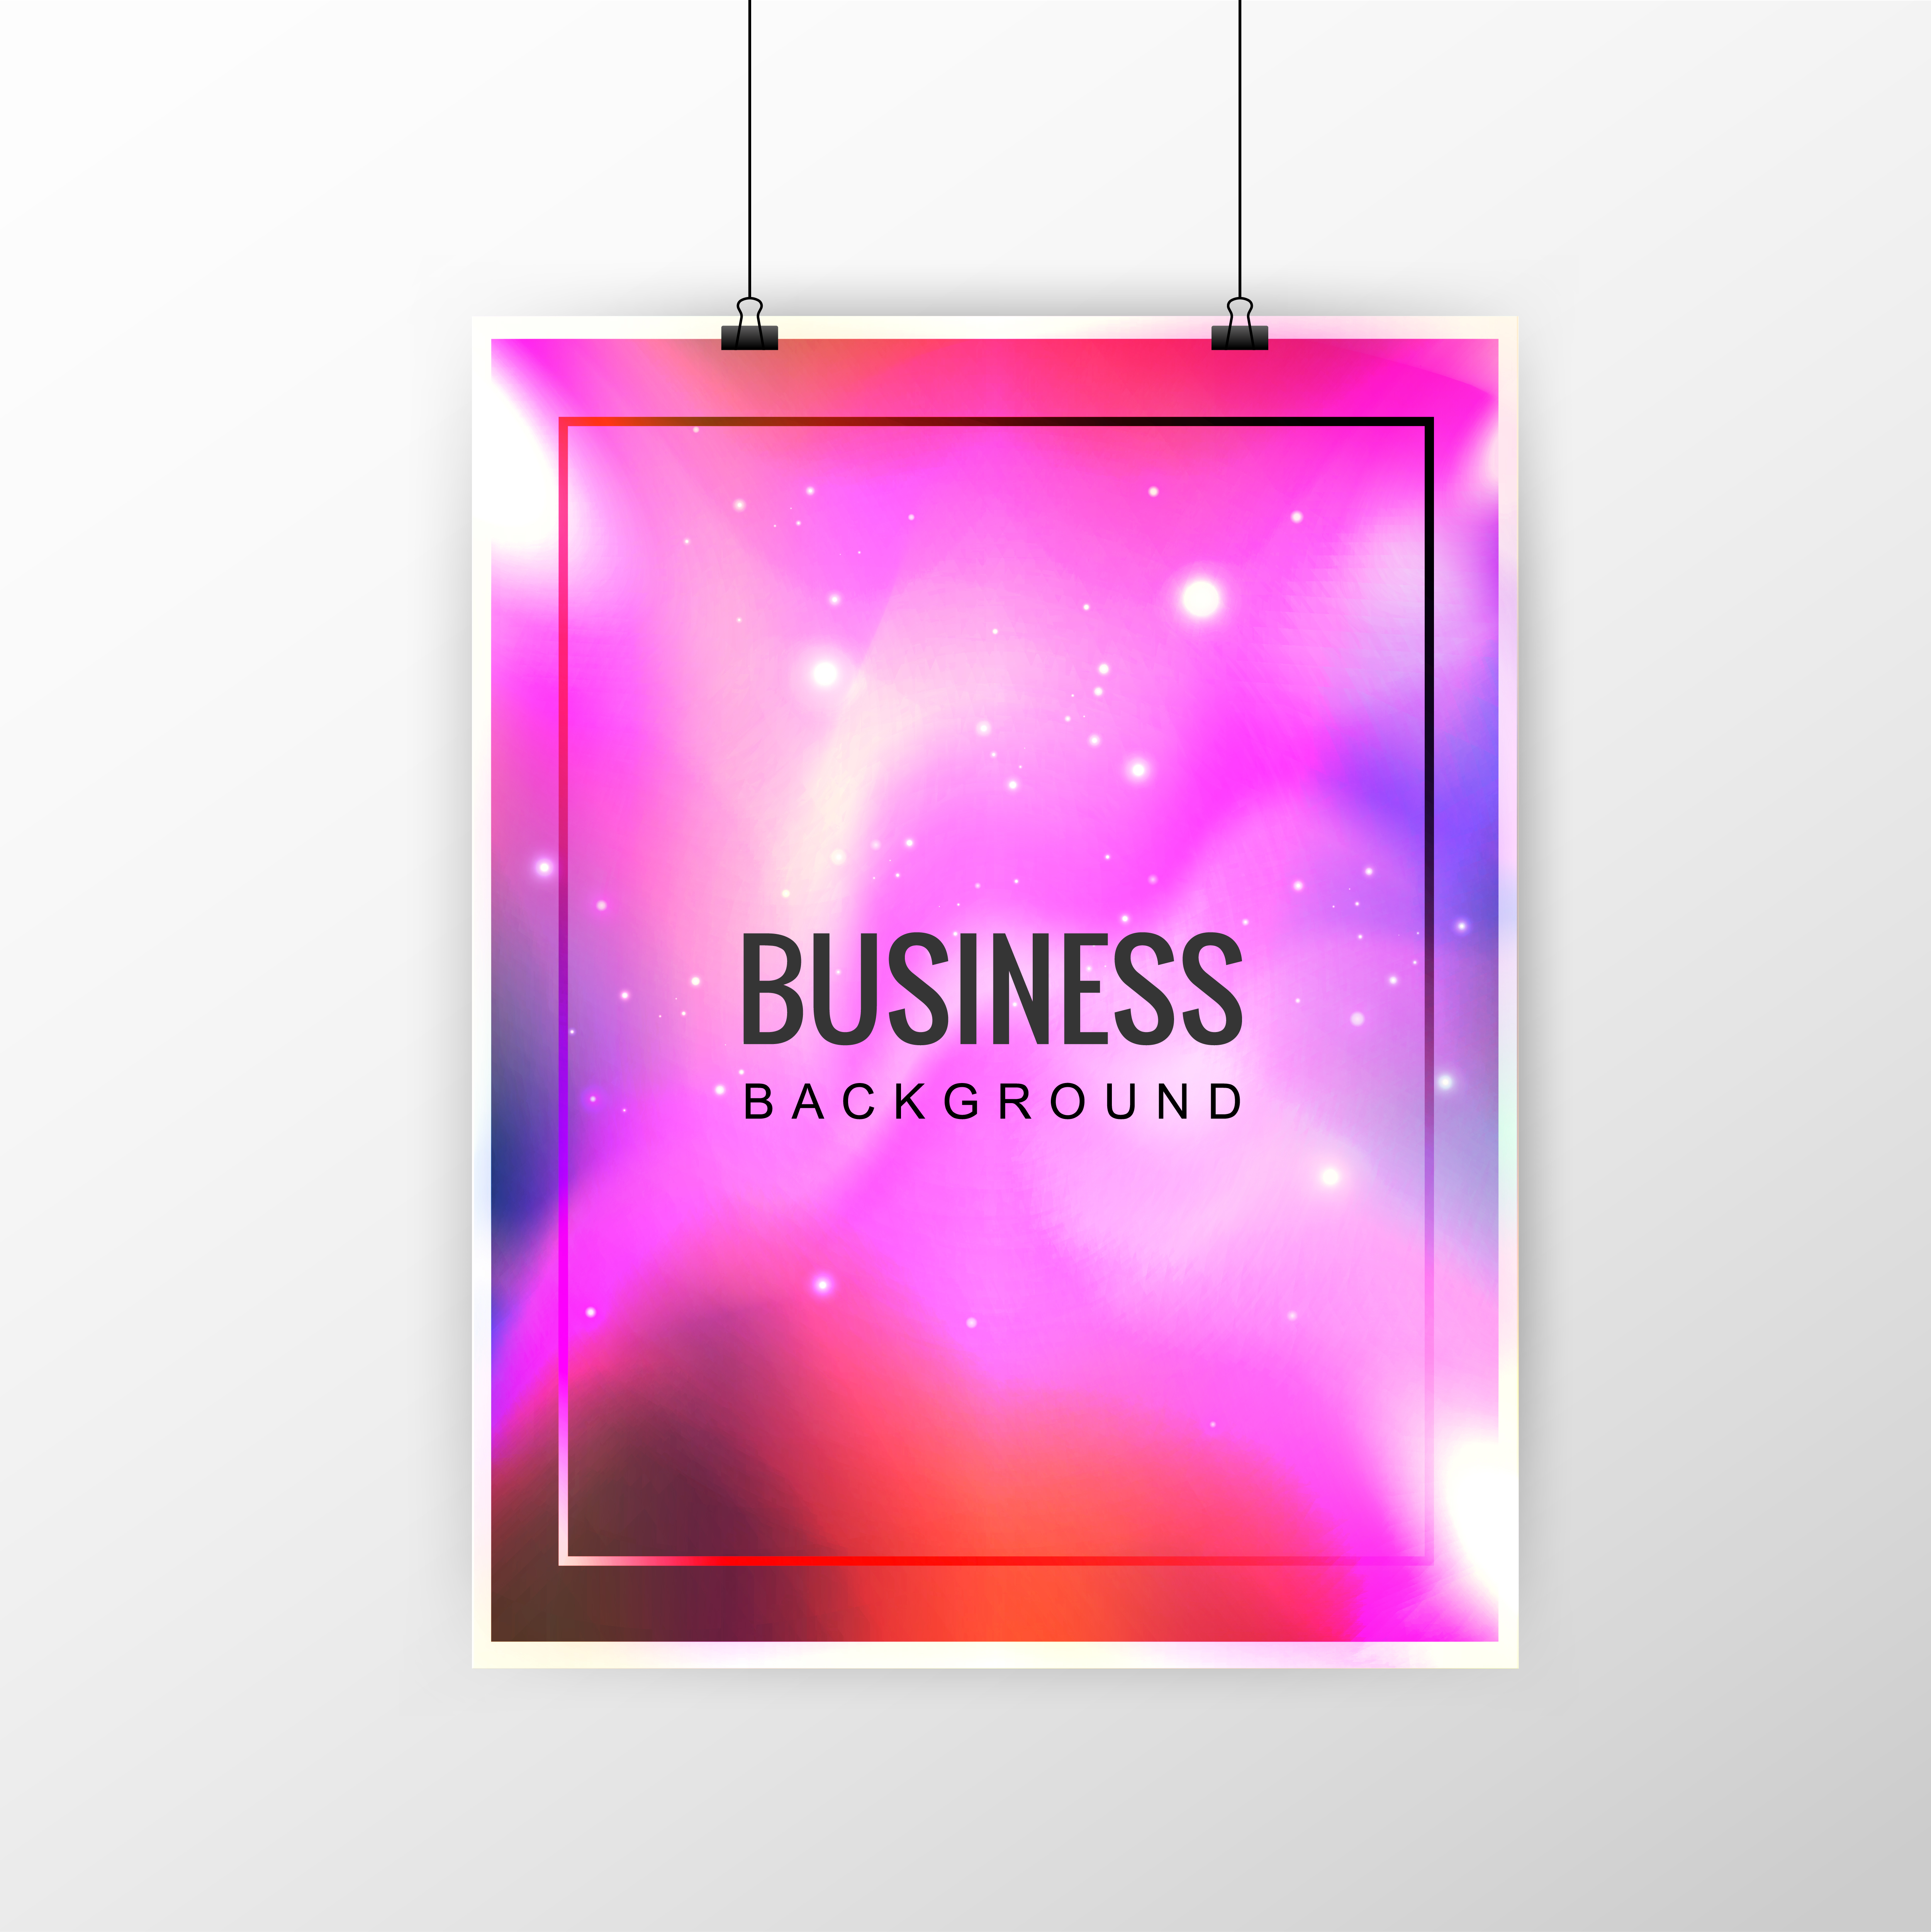 Download Hanging Stand Display Mockup For Business Advertising And Promotion Download Free Vectors Clipart Graphics Vector Art PSD Mockup Templates